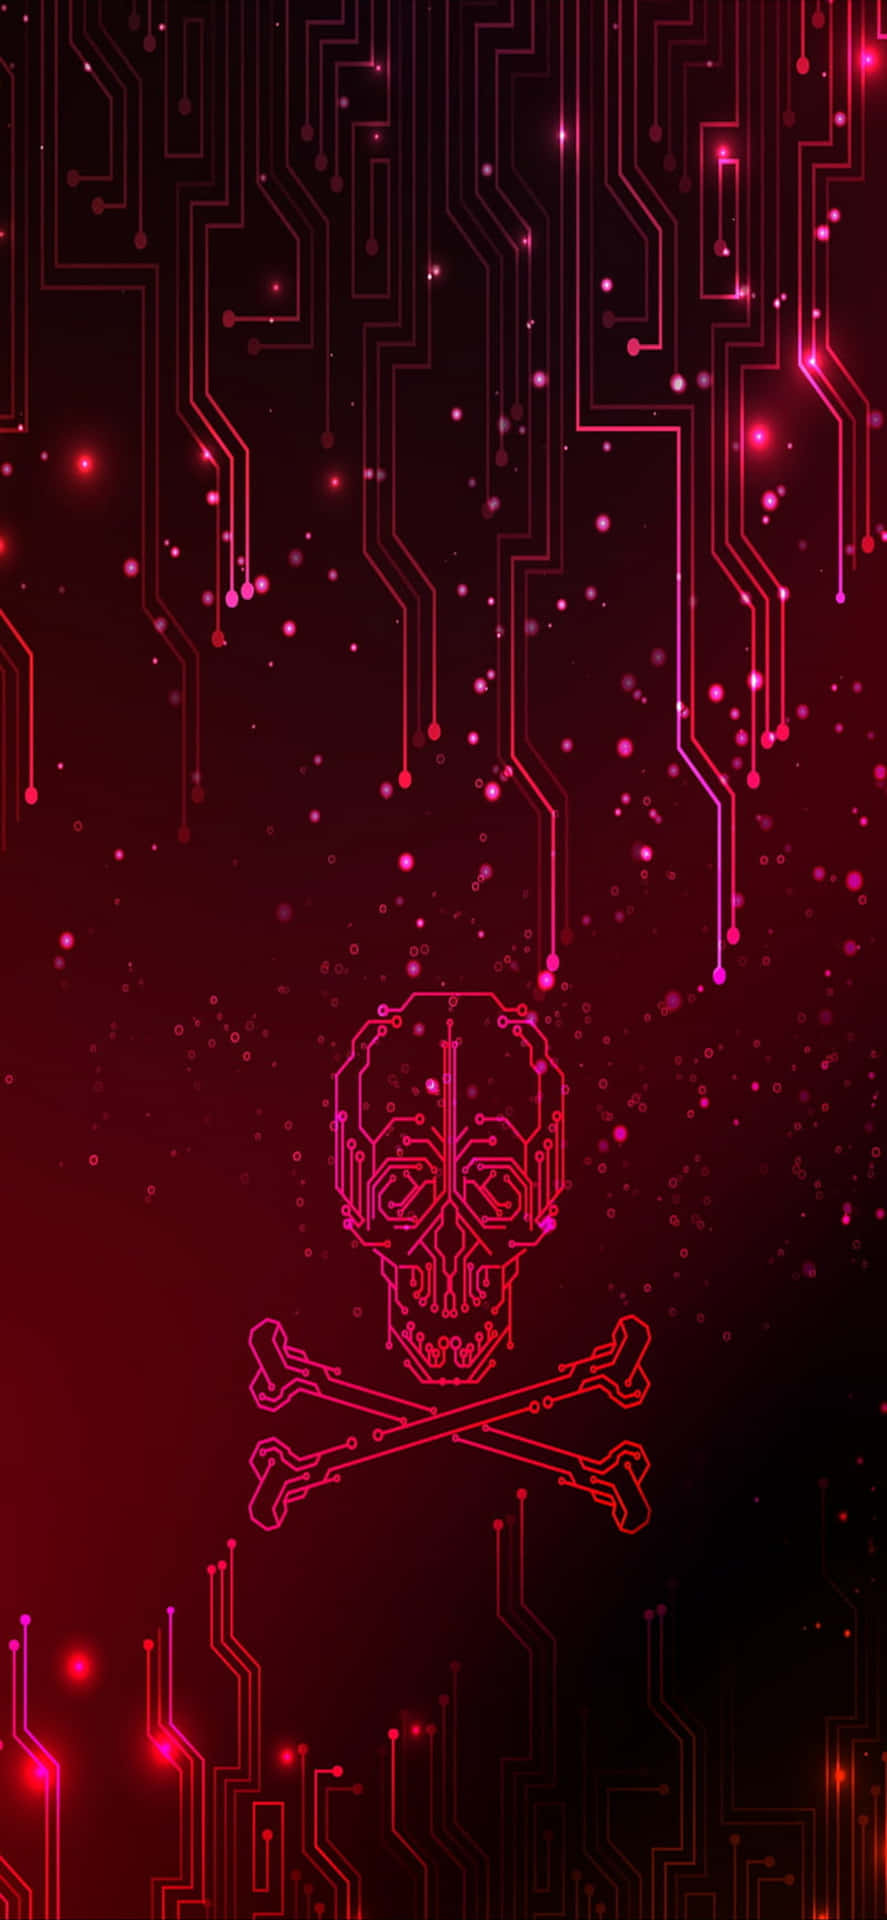 A Red Background With A Skull And Crossbones